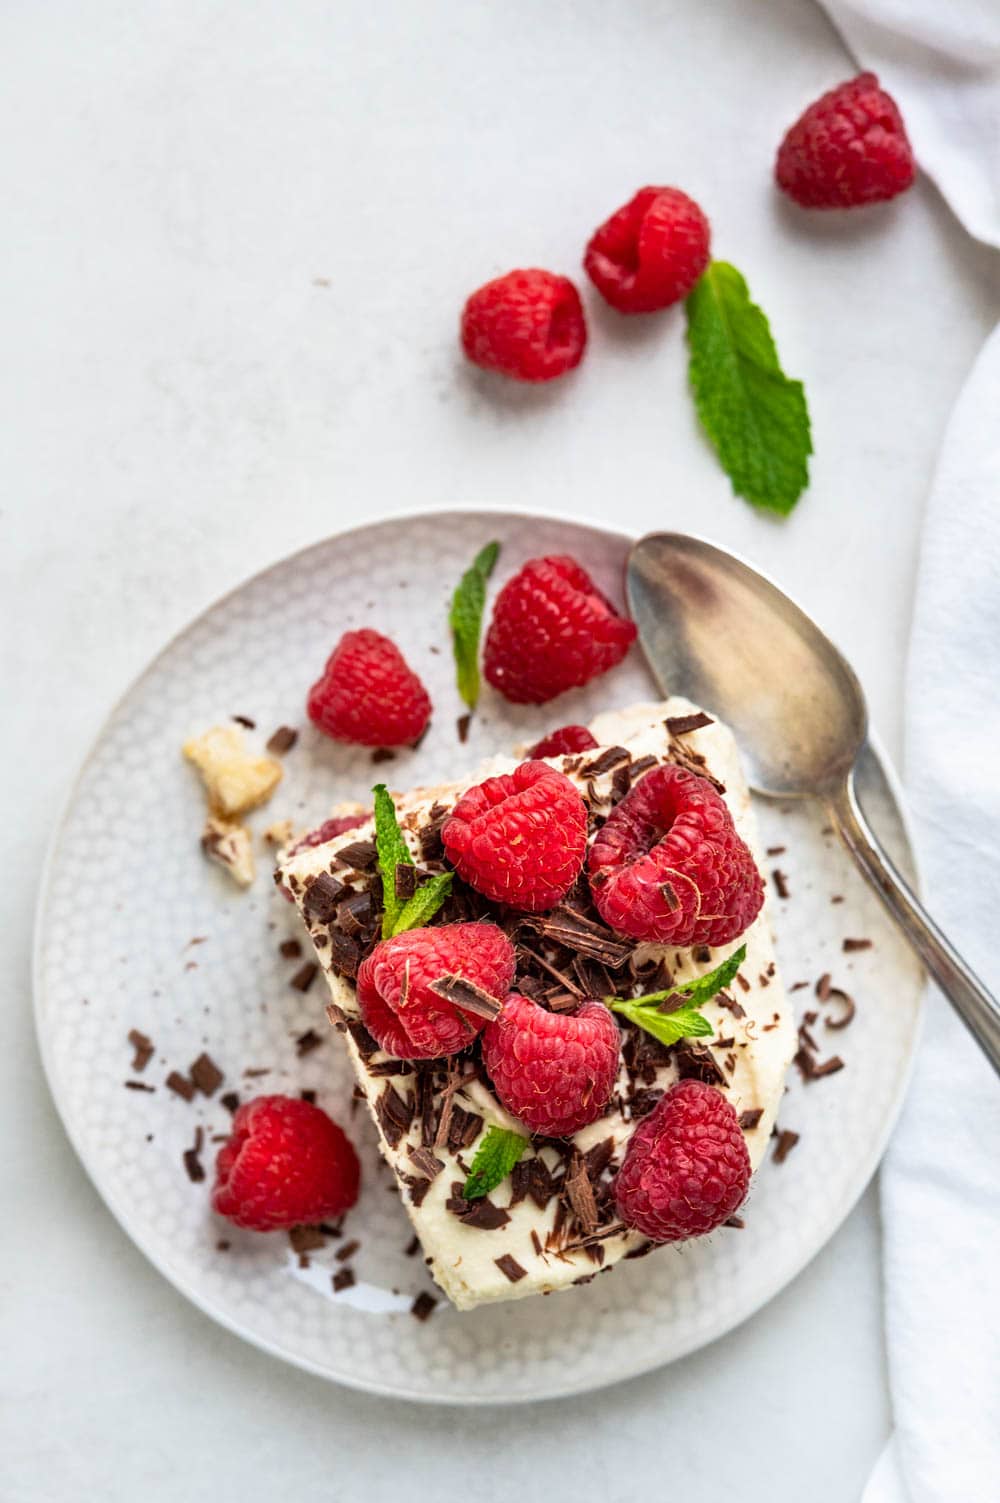 A serving of raspberry tiramisu on a plate with chocolate and mint.